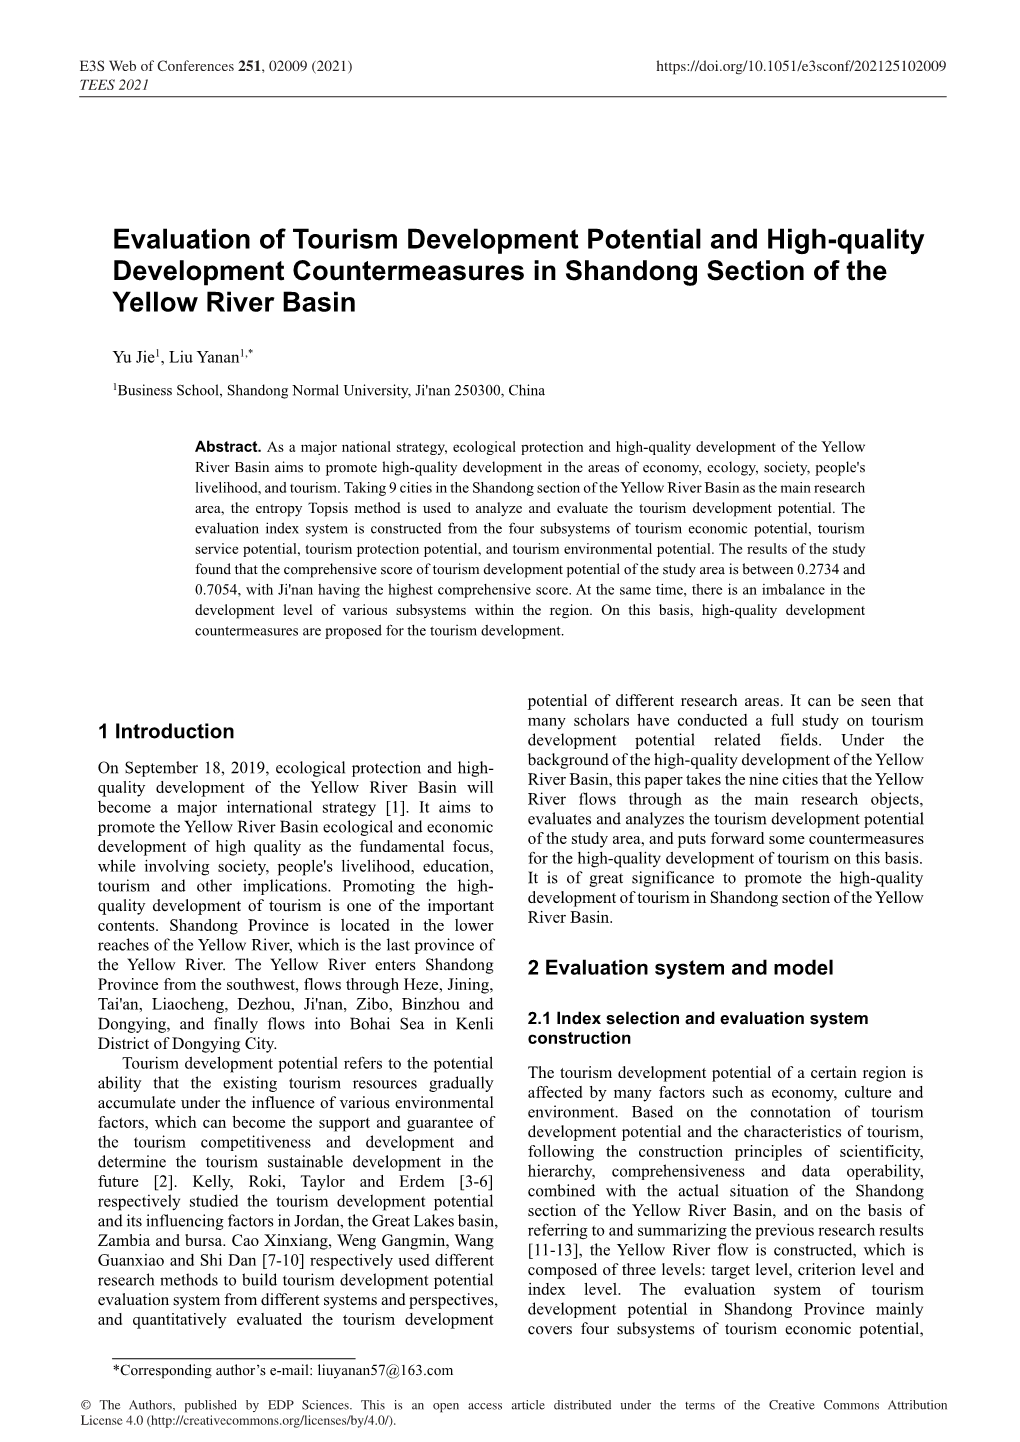 Evaluation of Tourism Development Potential and High-Quality Development Countermeasures in Shandong Section of the Yellow River Basin